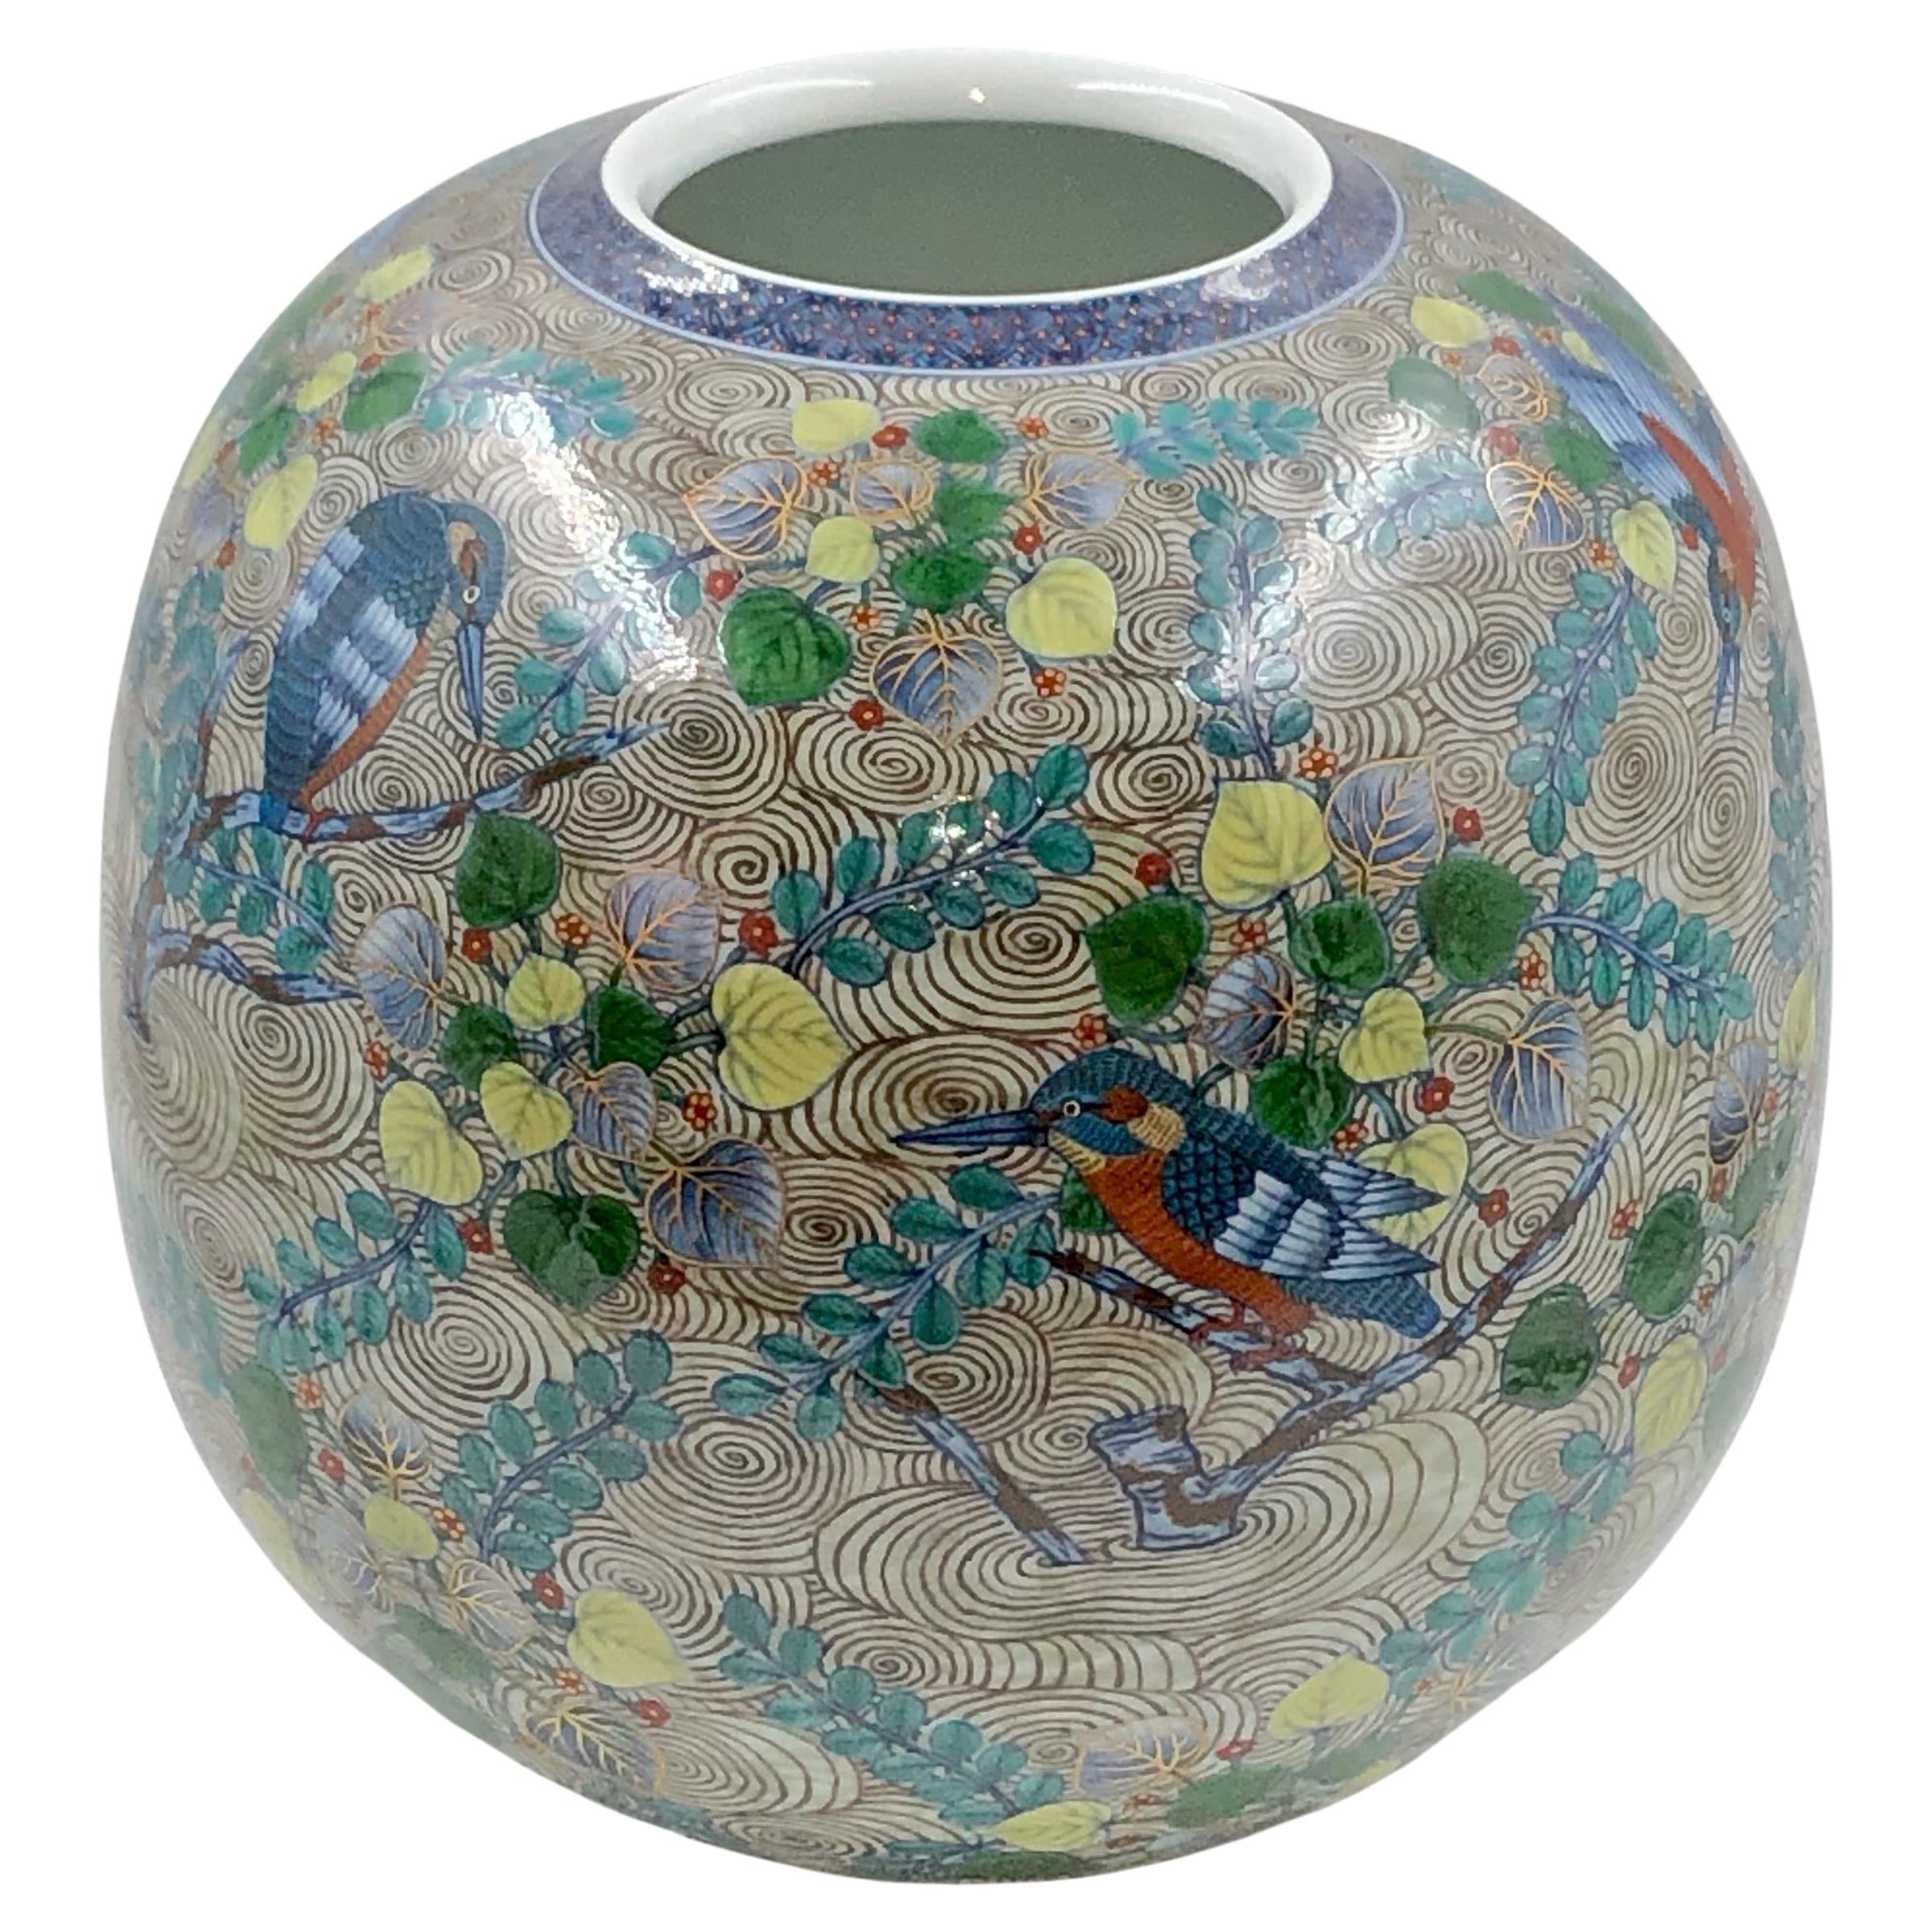 Gilt Japanese Contemporary Blue Green Yellow Platinum Porcelain Vase by Master Artist For Sale